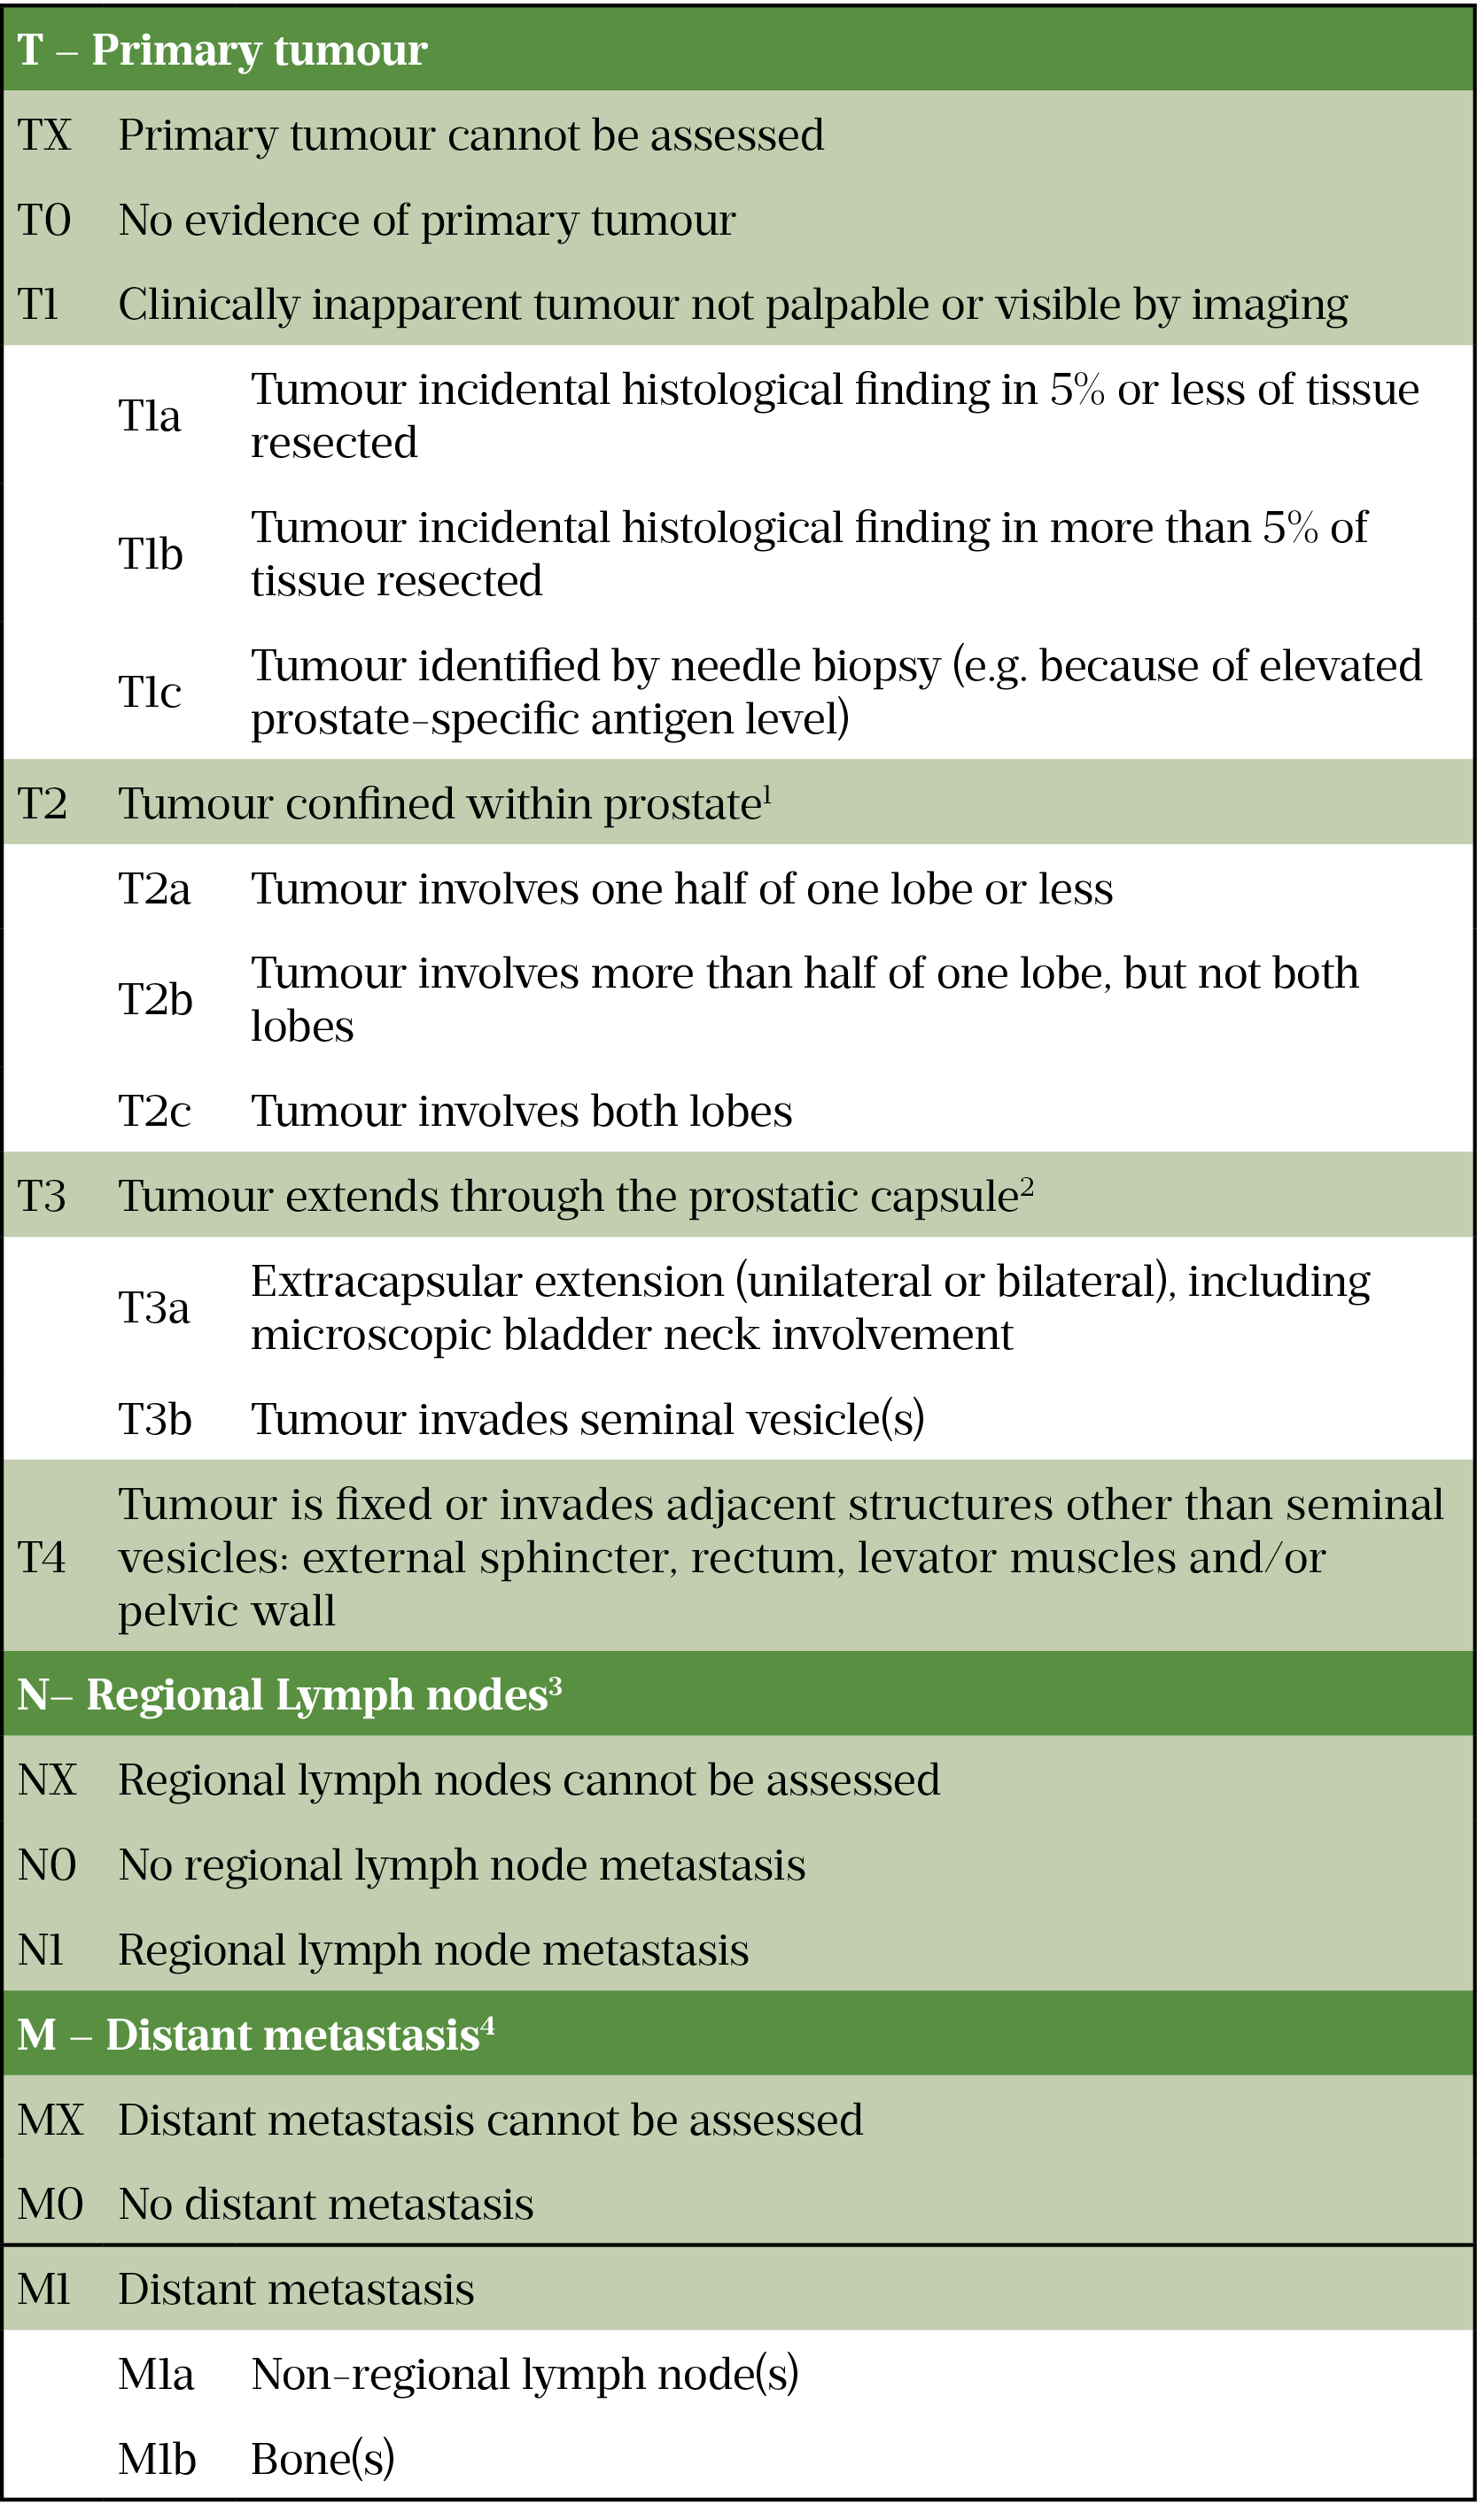 Table 3: Tumour Node Metastasis classification of prostate cancer